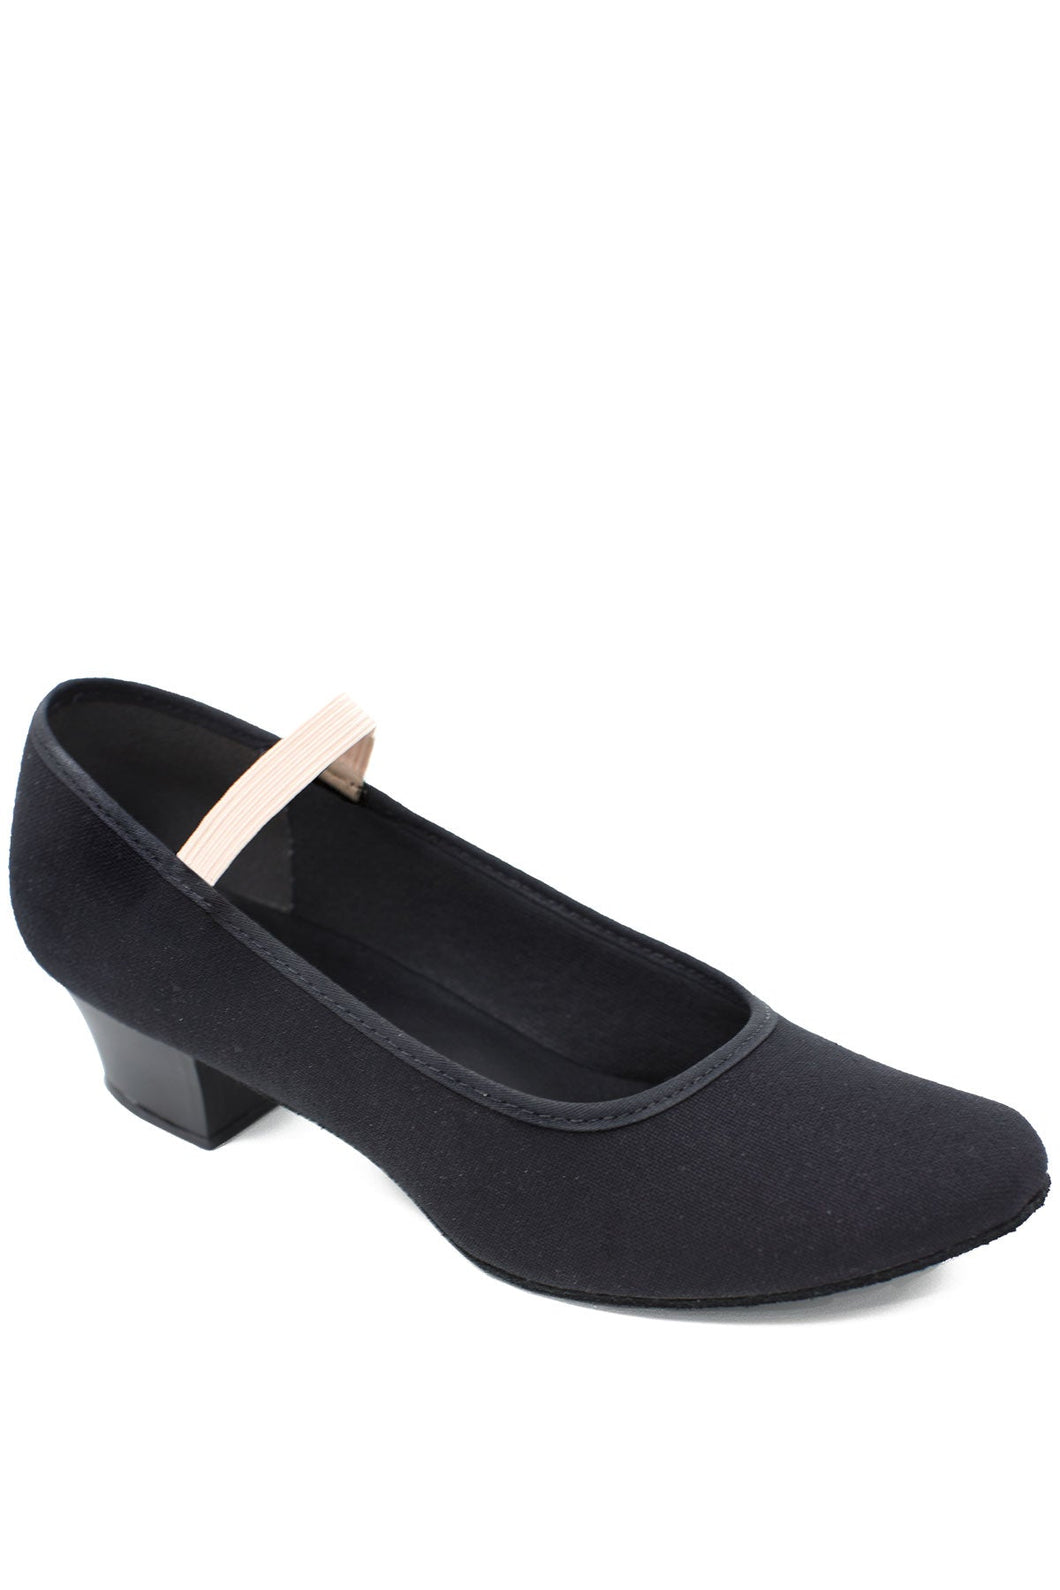 Muriel - Pre Arched Royal Adult Shoes - RO14